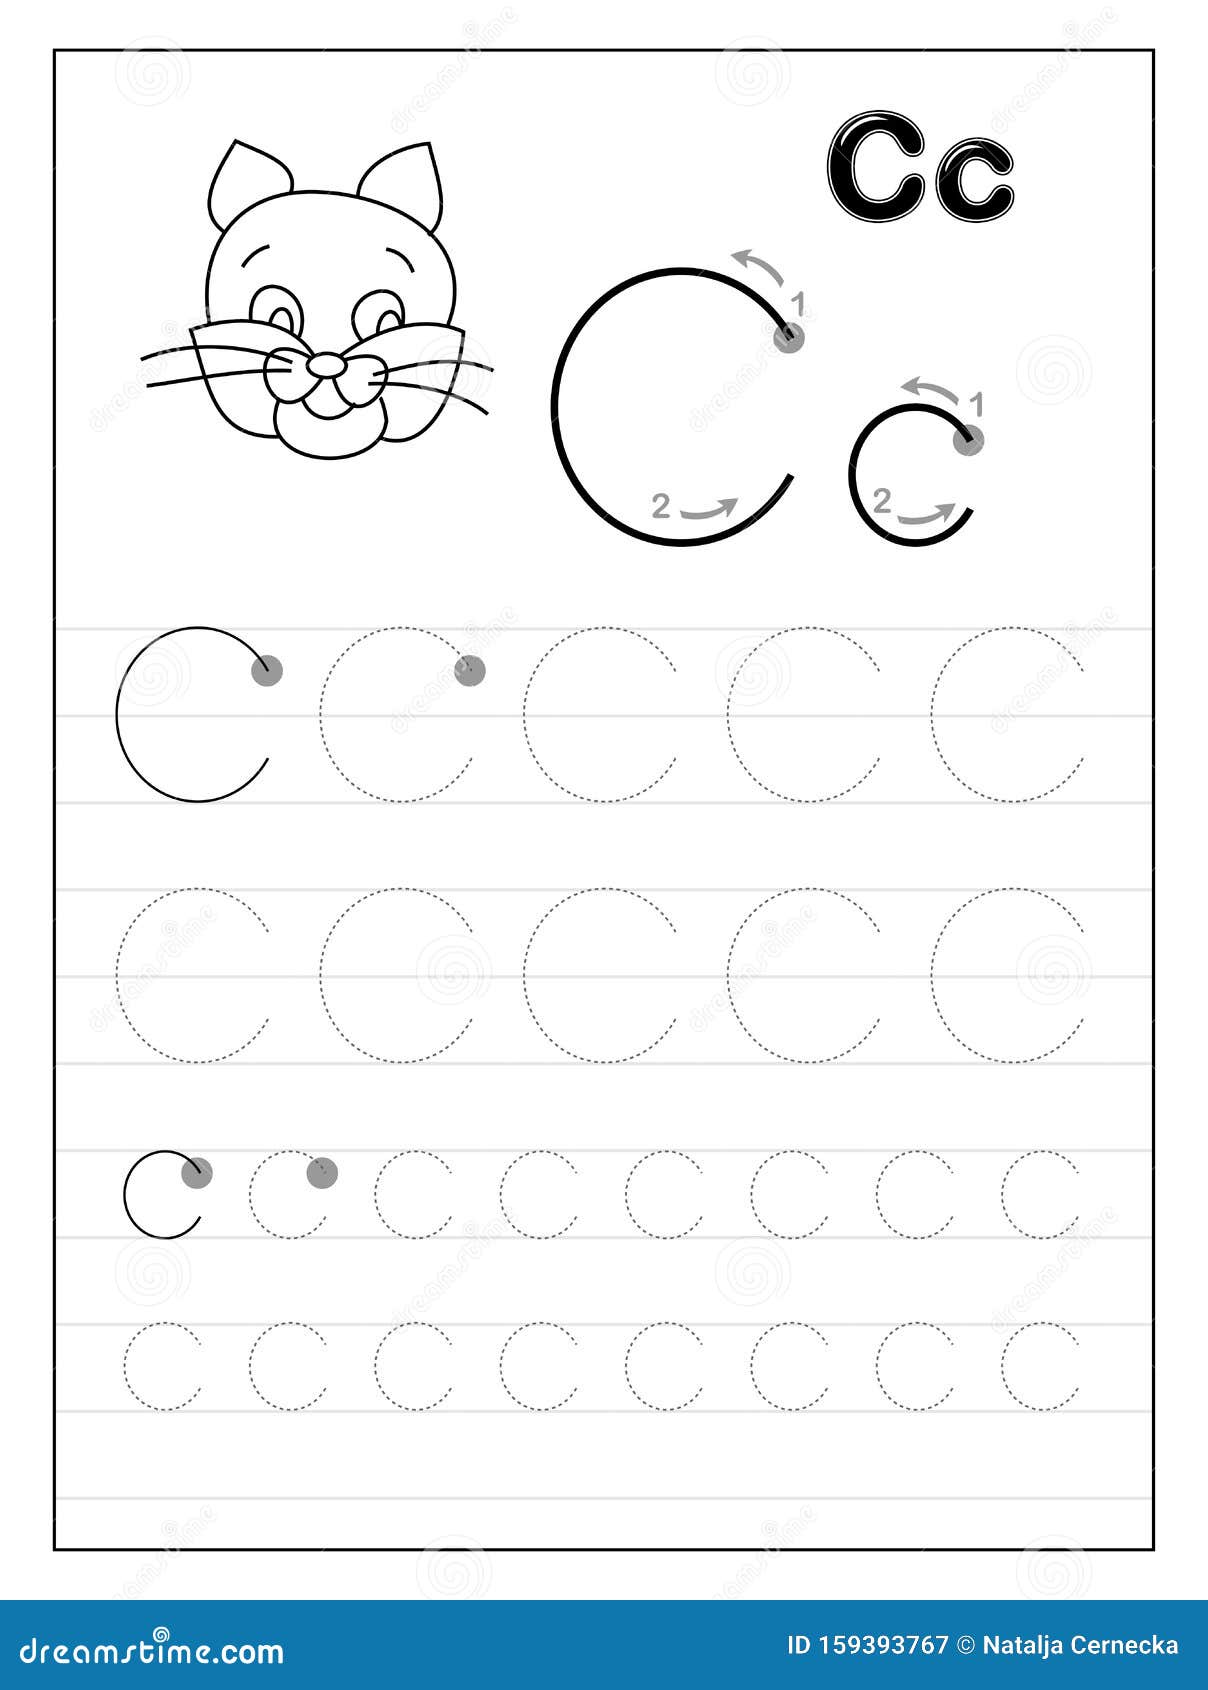 Tracing Alphabet Letter C Black And White Educational Pages On Line For Kids Stock Vector Illustration Of Kids Cartoon 159393767